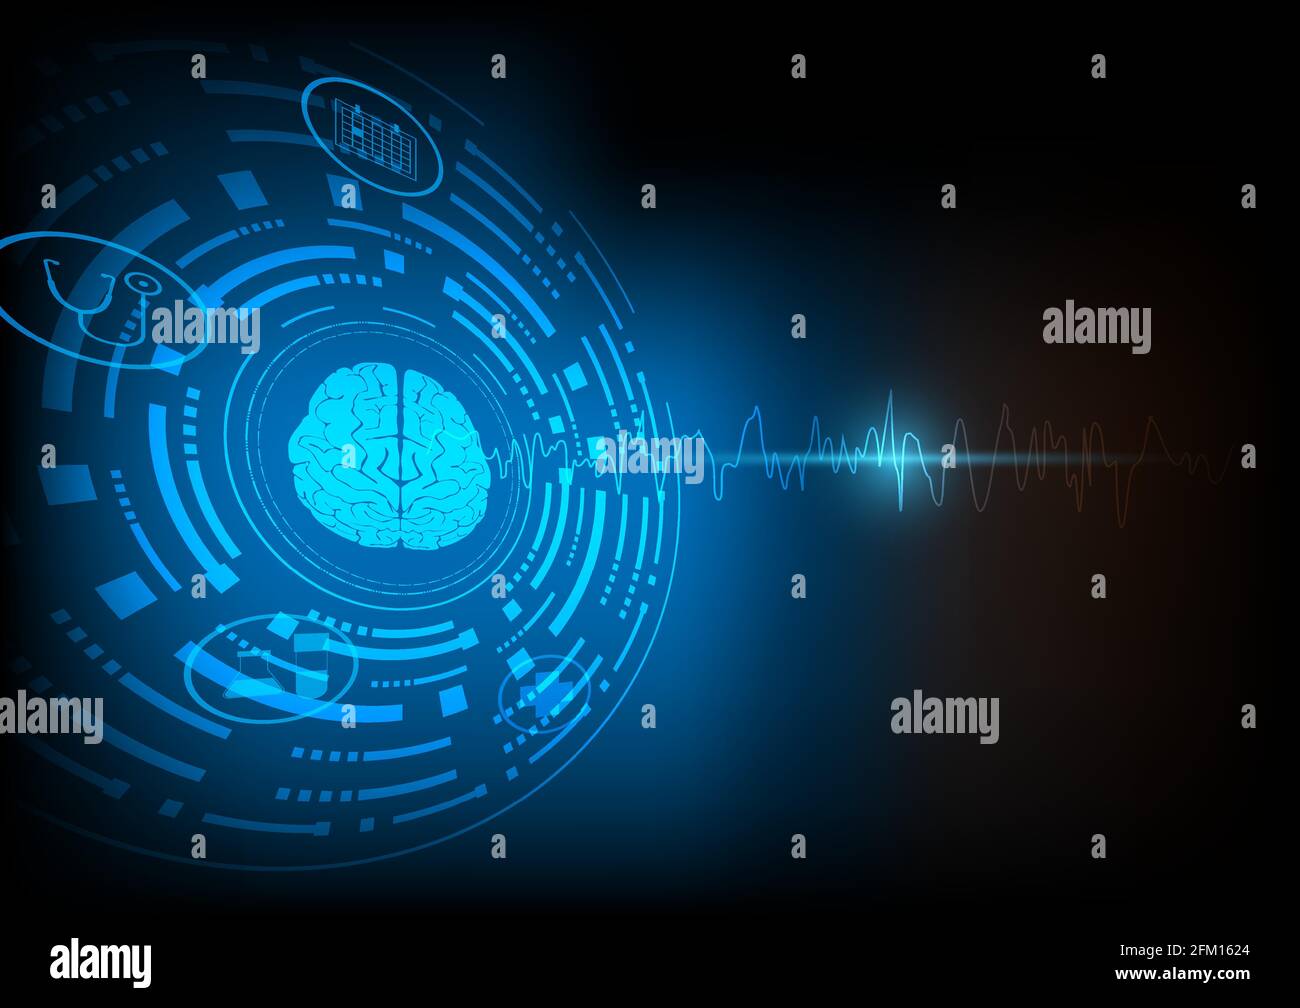 Focal seizure. Illustration of human brain and electroencephalograhy or EEG originating from one regional onset. Technology background. Stock Vector